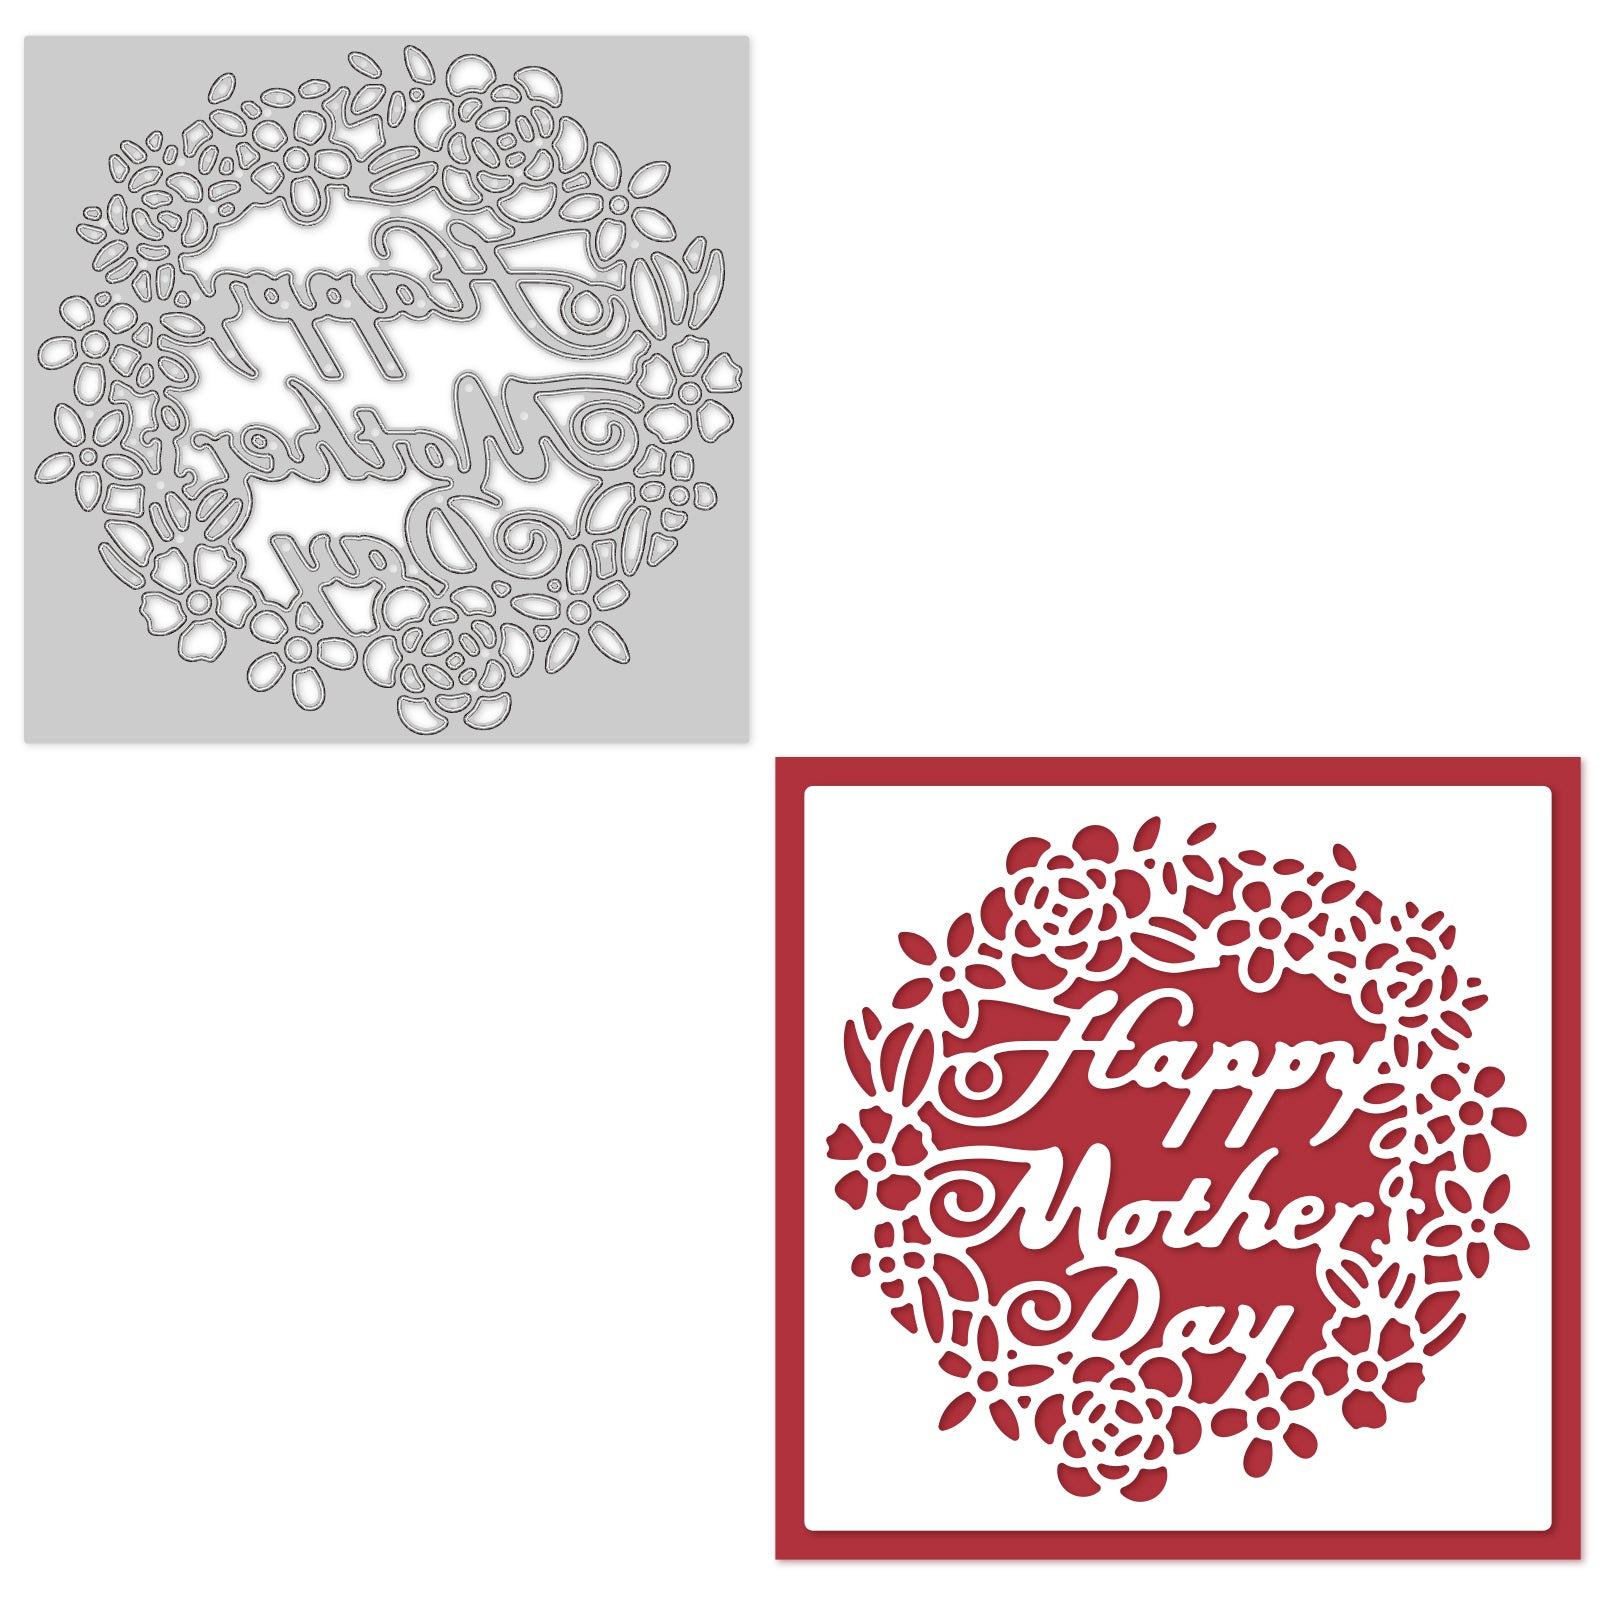 Globleland Mother's Day, Greeting Card, Happy Mother's Day Text, Flowers, Frame Carbon Steel Cutting Dies Stencils, for DIY Scrapbooking/Photo Album, Decorative Embossing DIY Paper Card